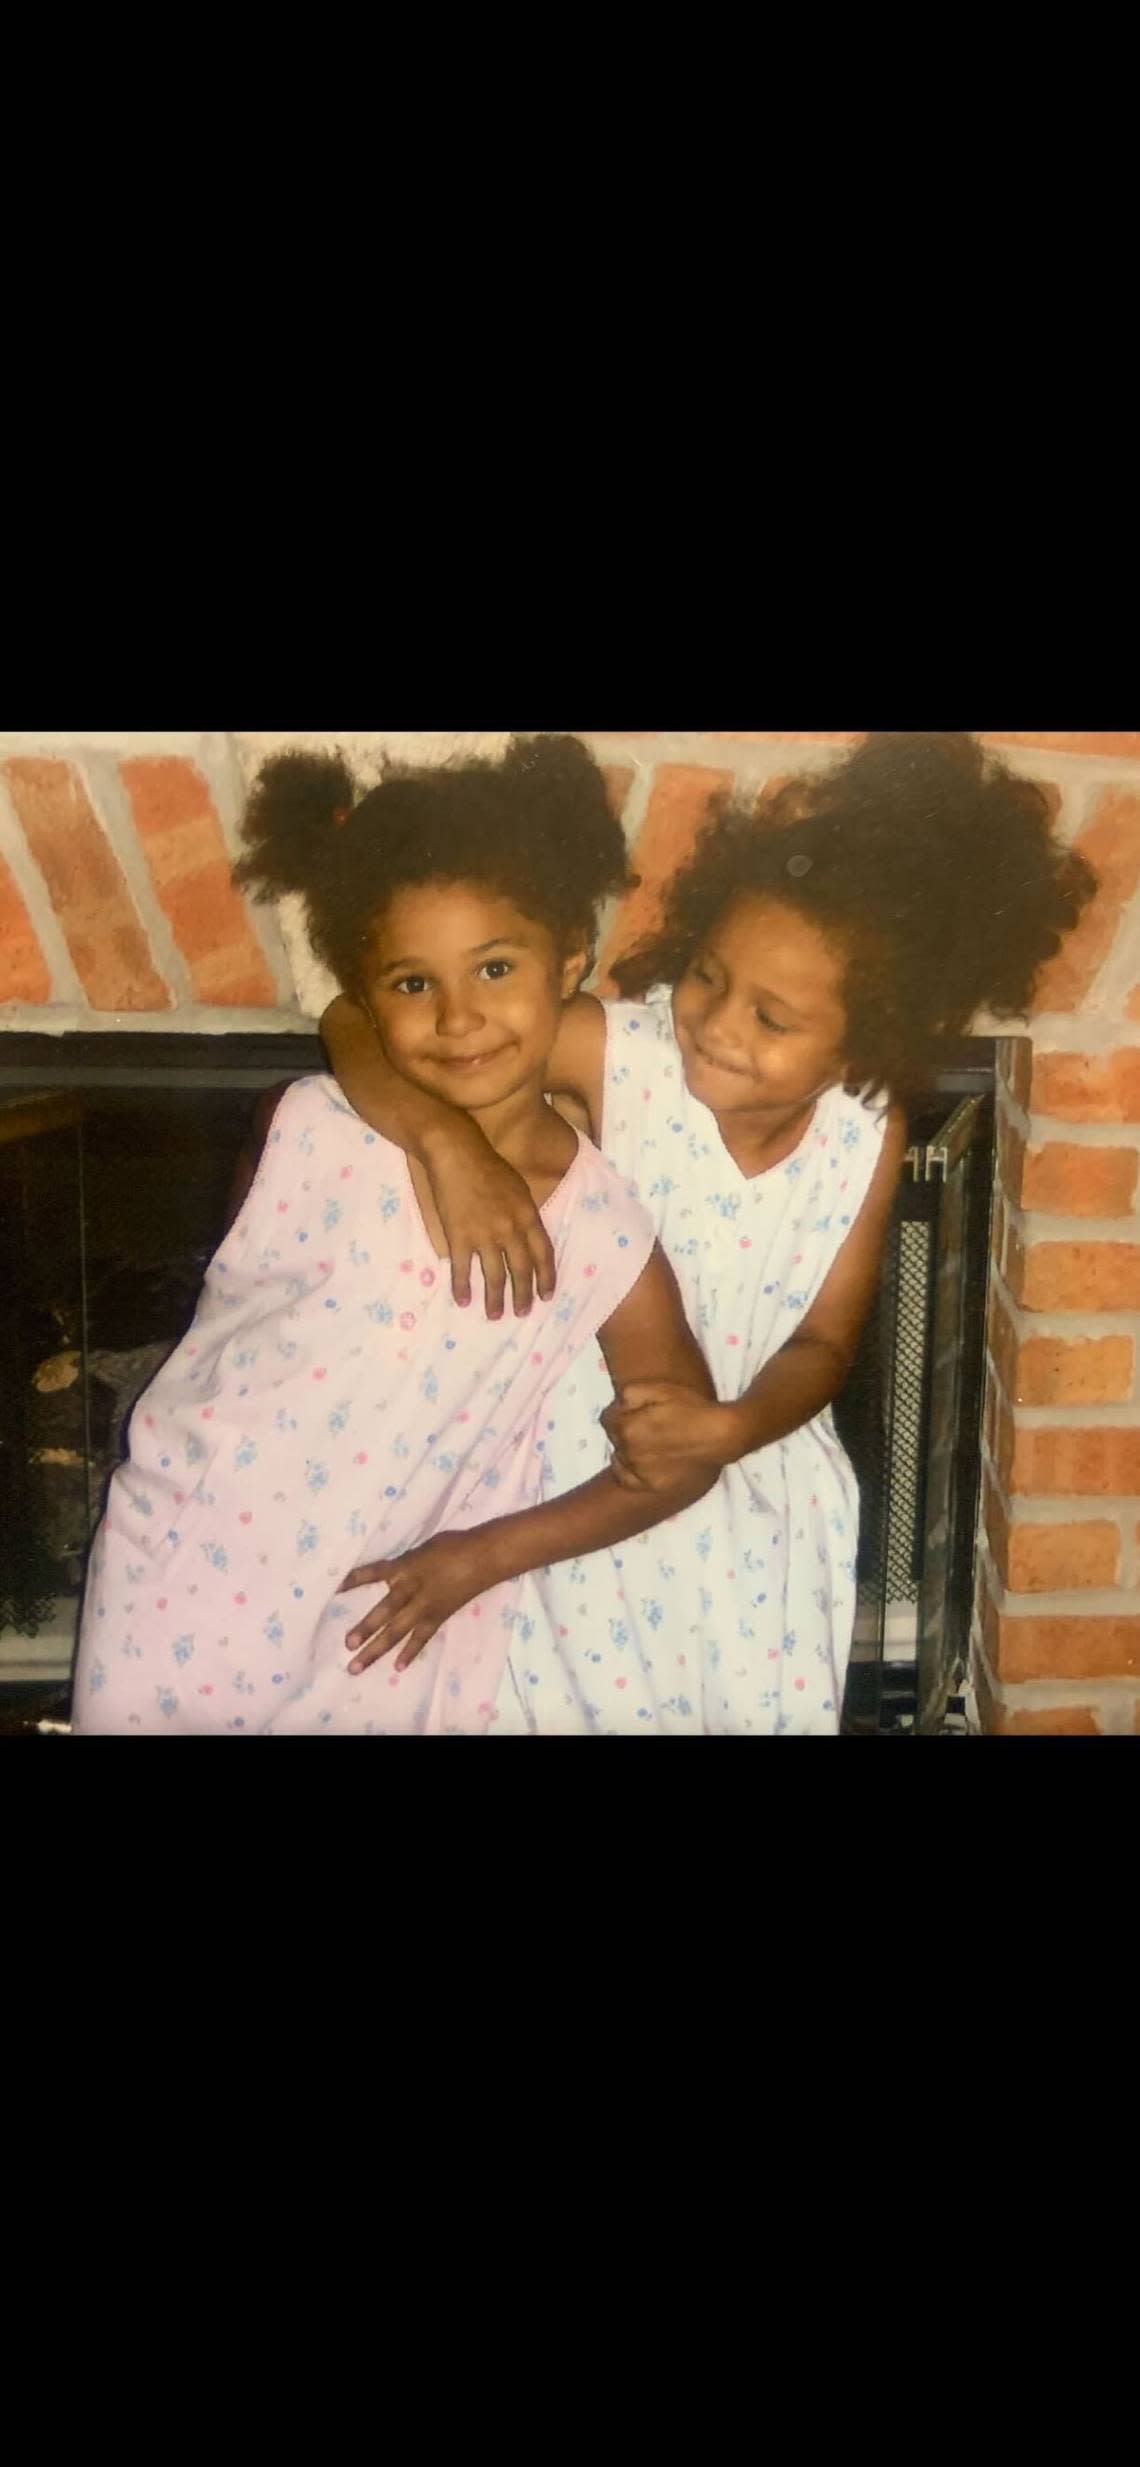 Shayla (left) and Sydnee (right) pose wearing matching gowns. The girls were always dressed alike as children.